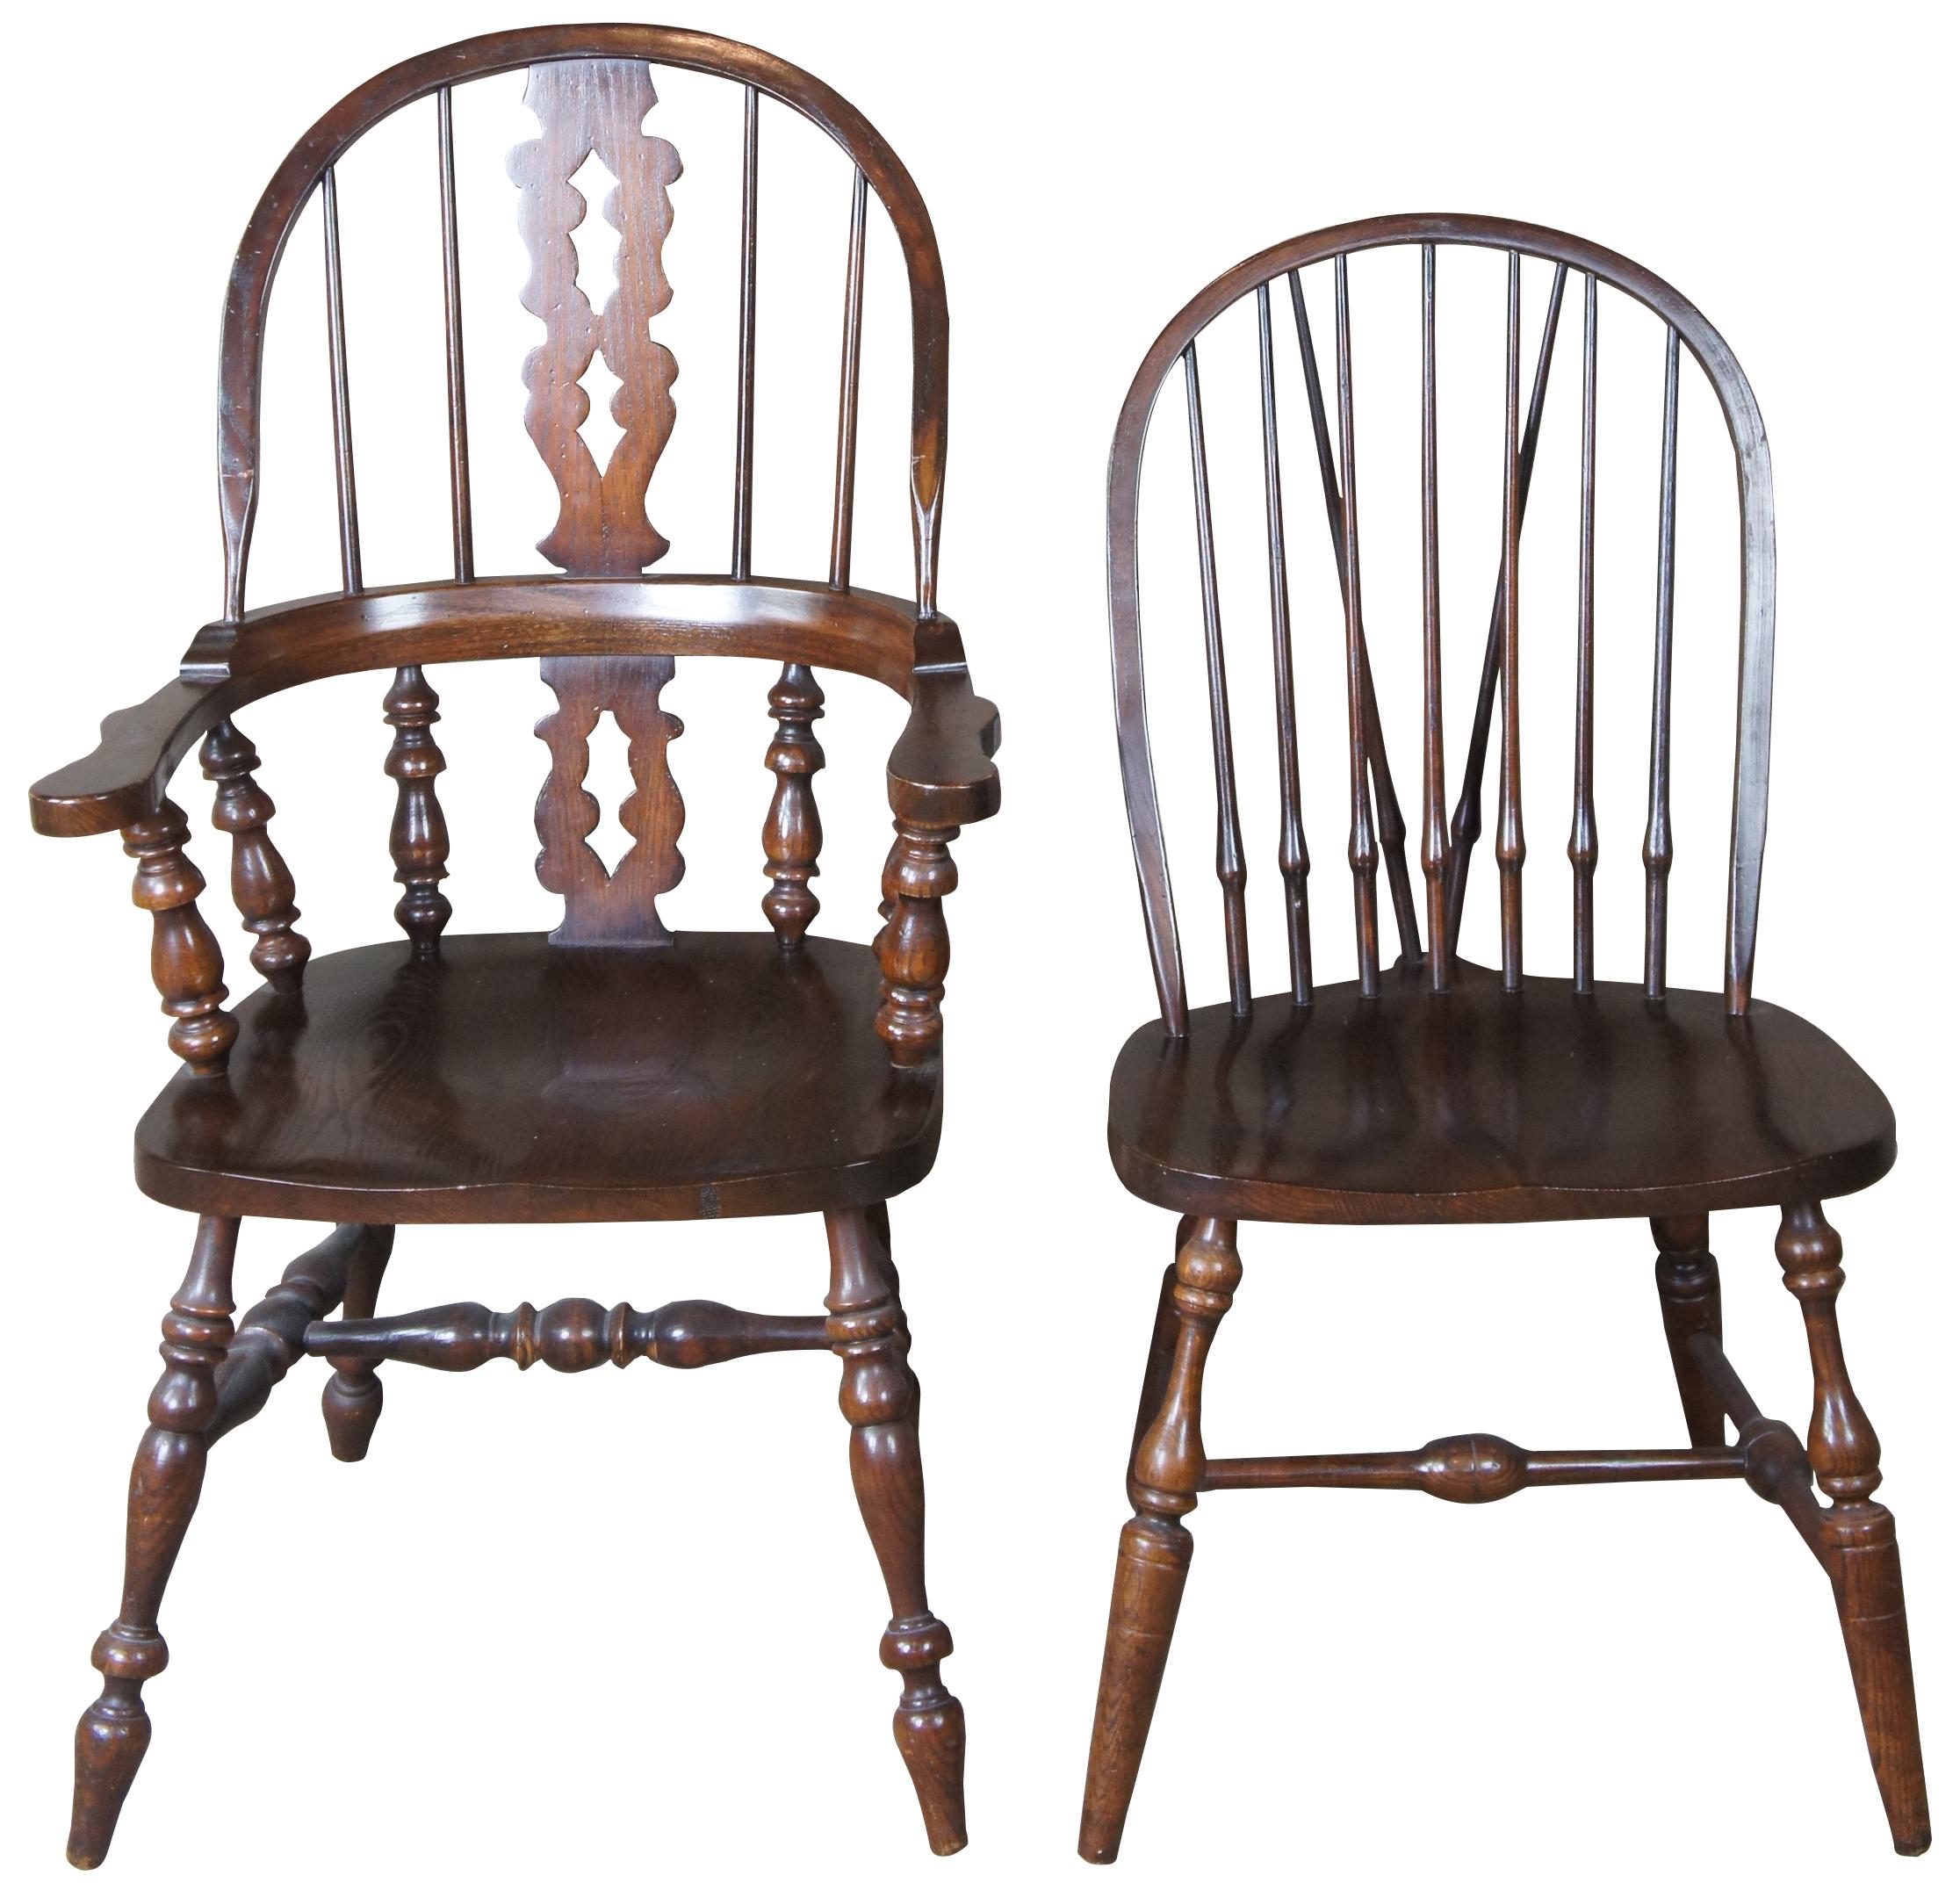 Eight 20th century Pennsylvania House Windsor style dining chairs. Finished in oak with two English Windsor armchairs in addition to the six brace back side chairs. Neatly designed with a saddle seat, turned legs connected by